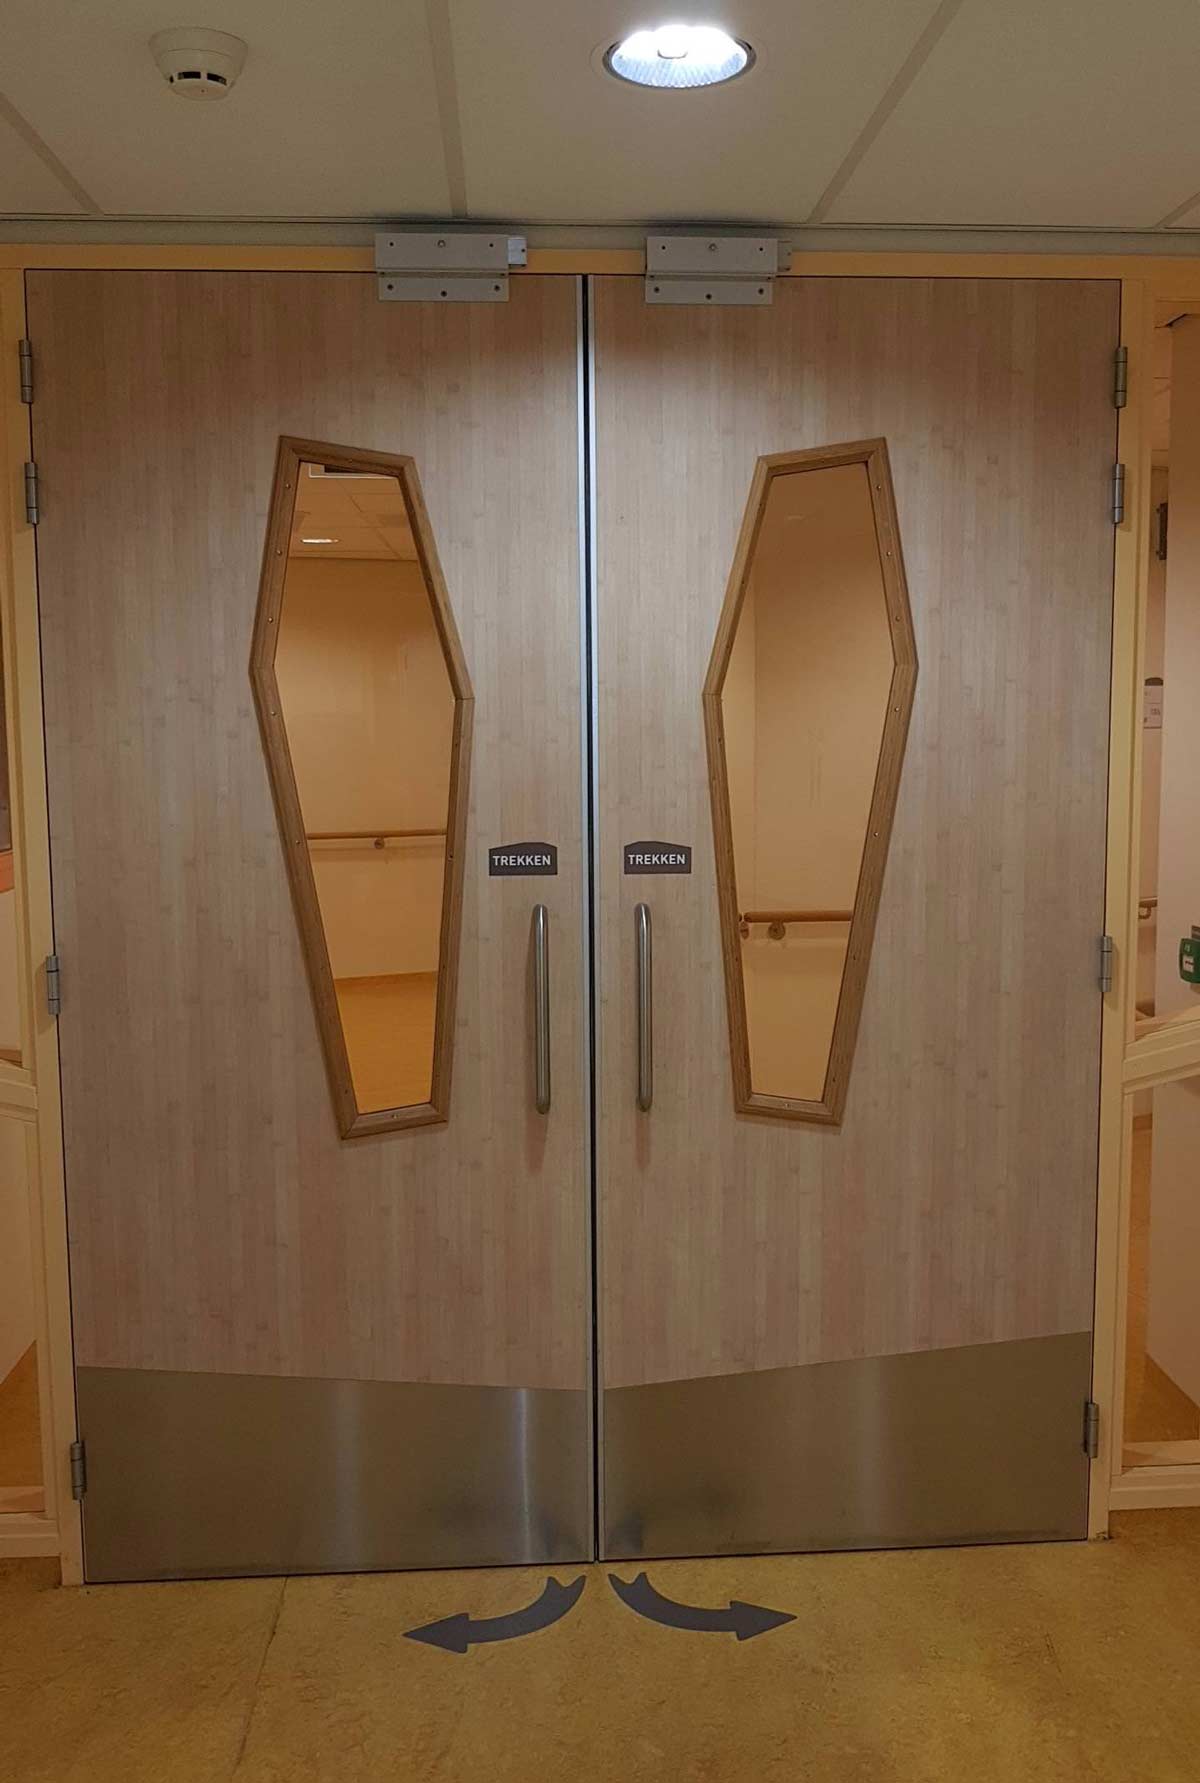 These coffin-shaped door windows at a hospital